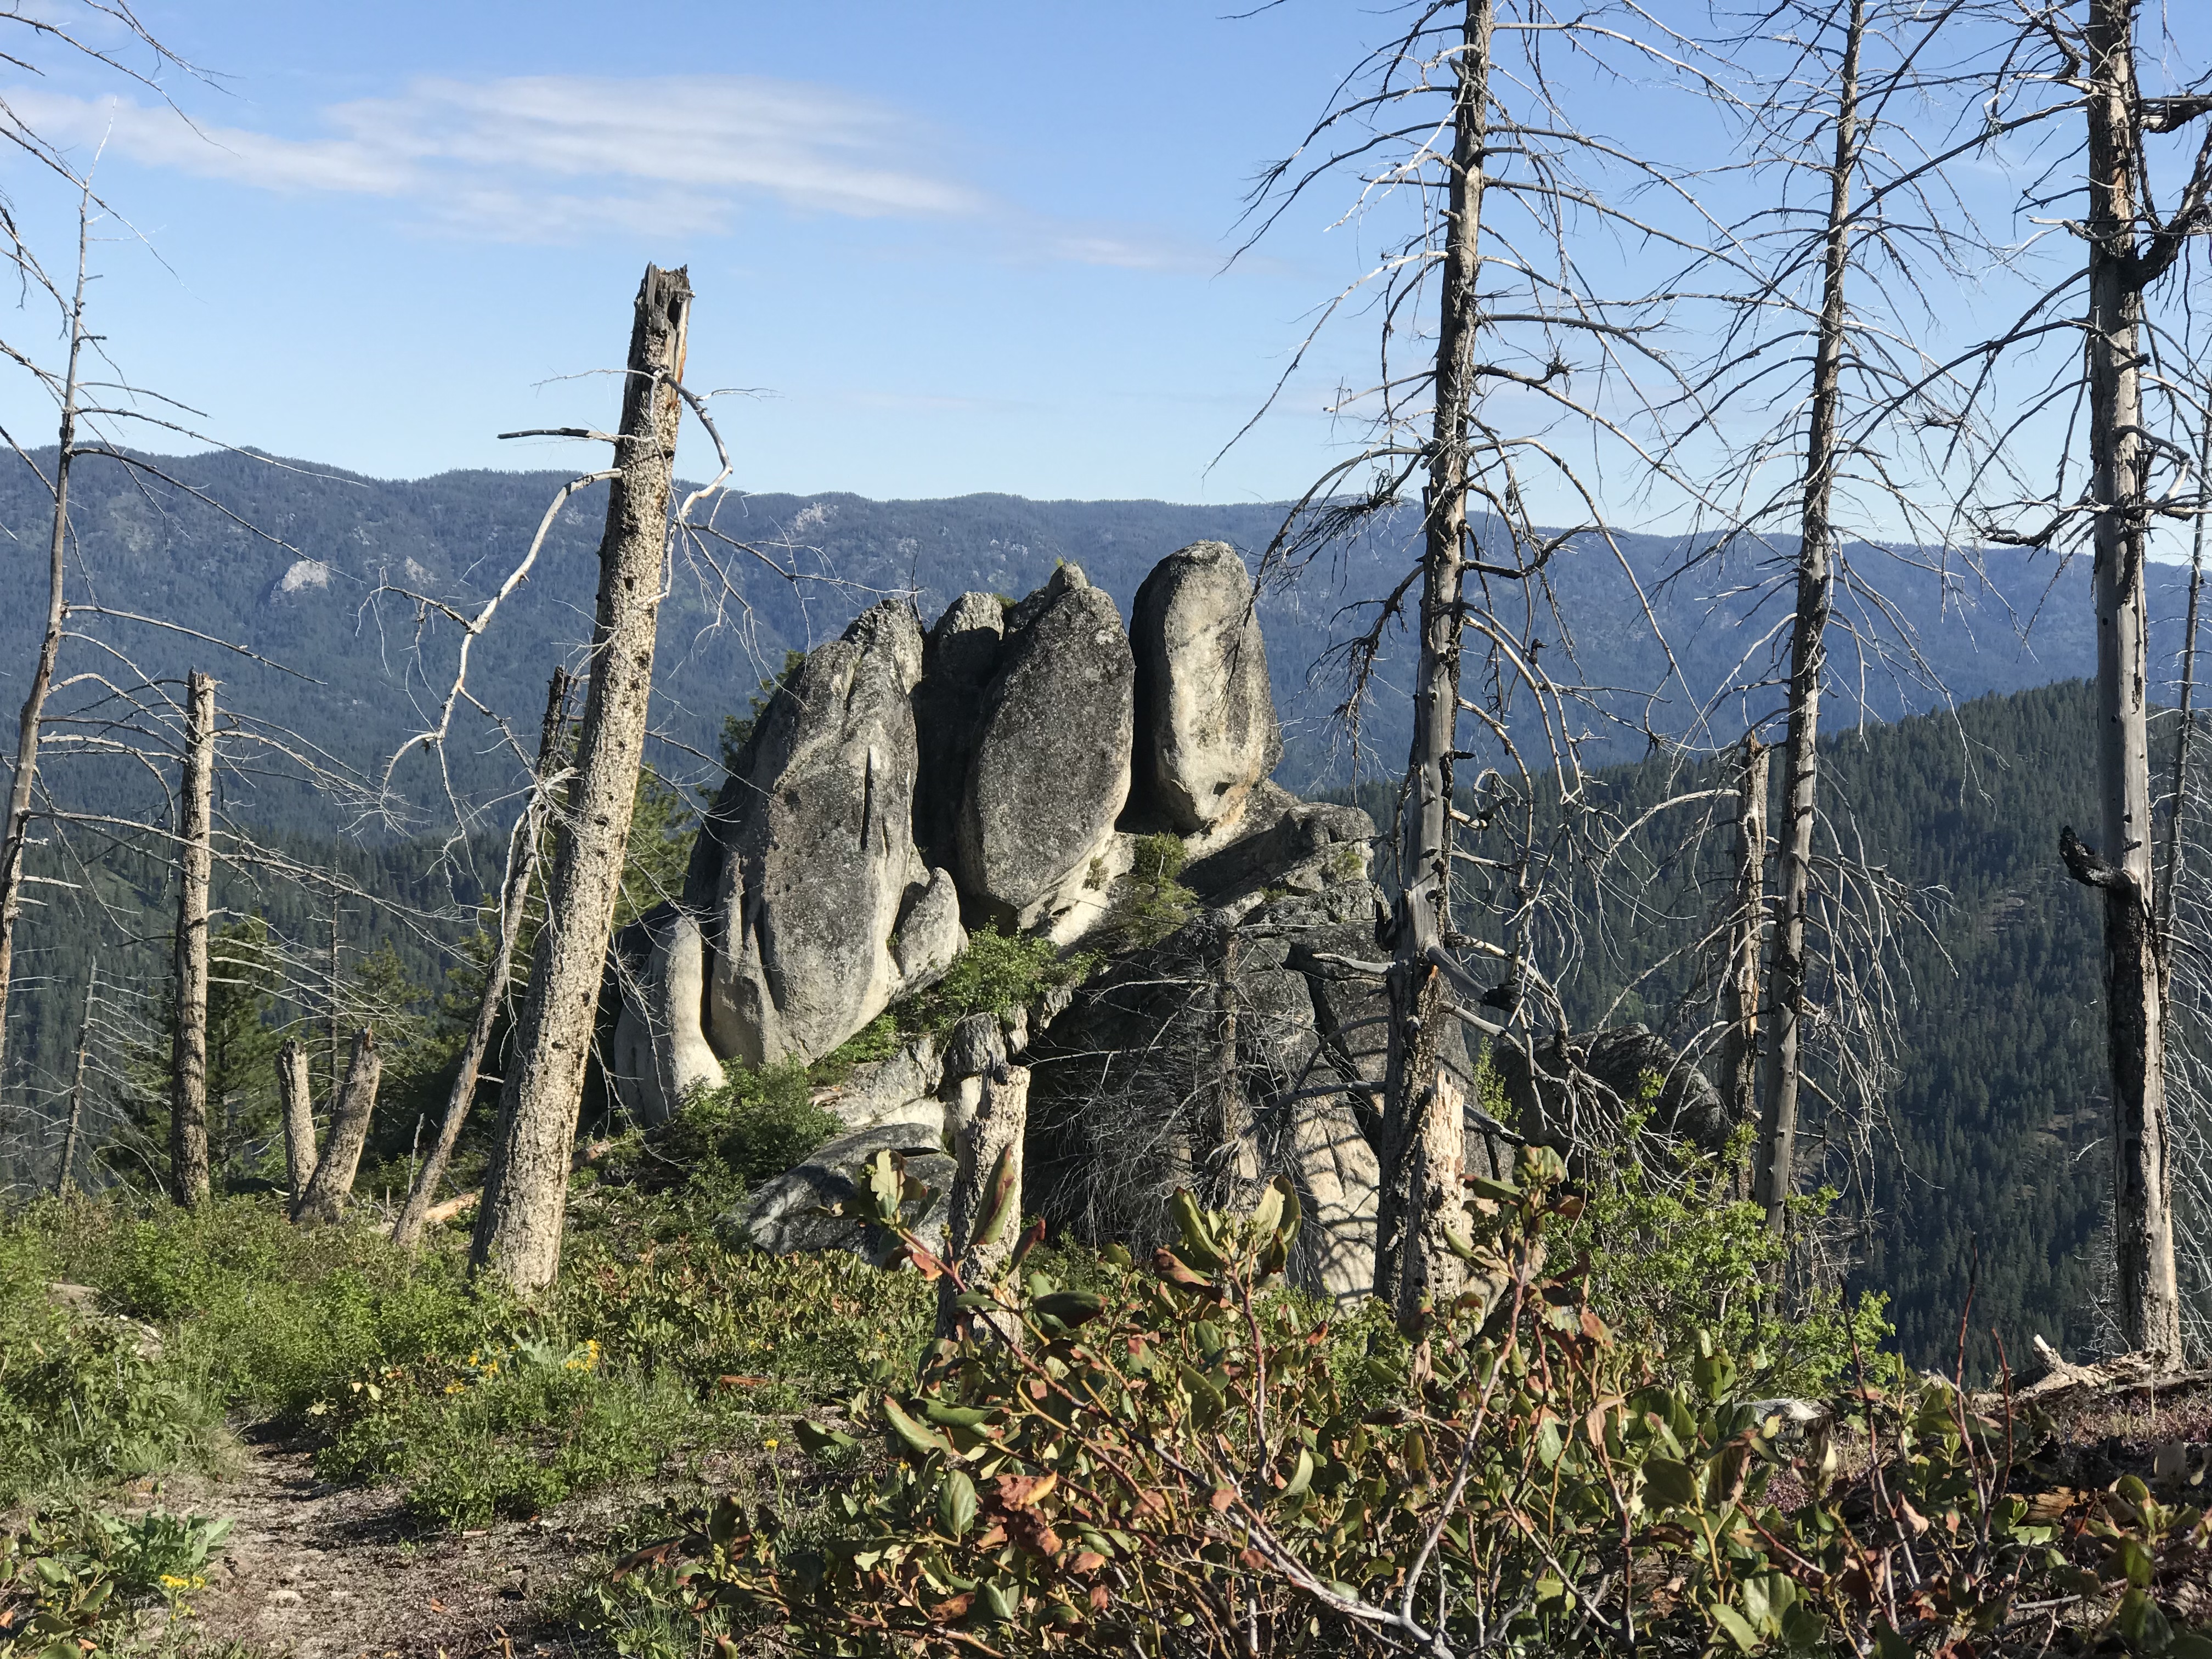 The trail passes many granite towers on its way to the summit.